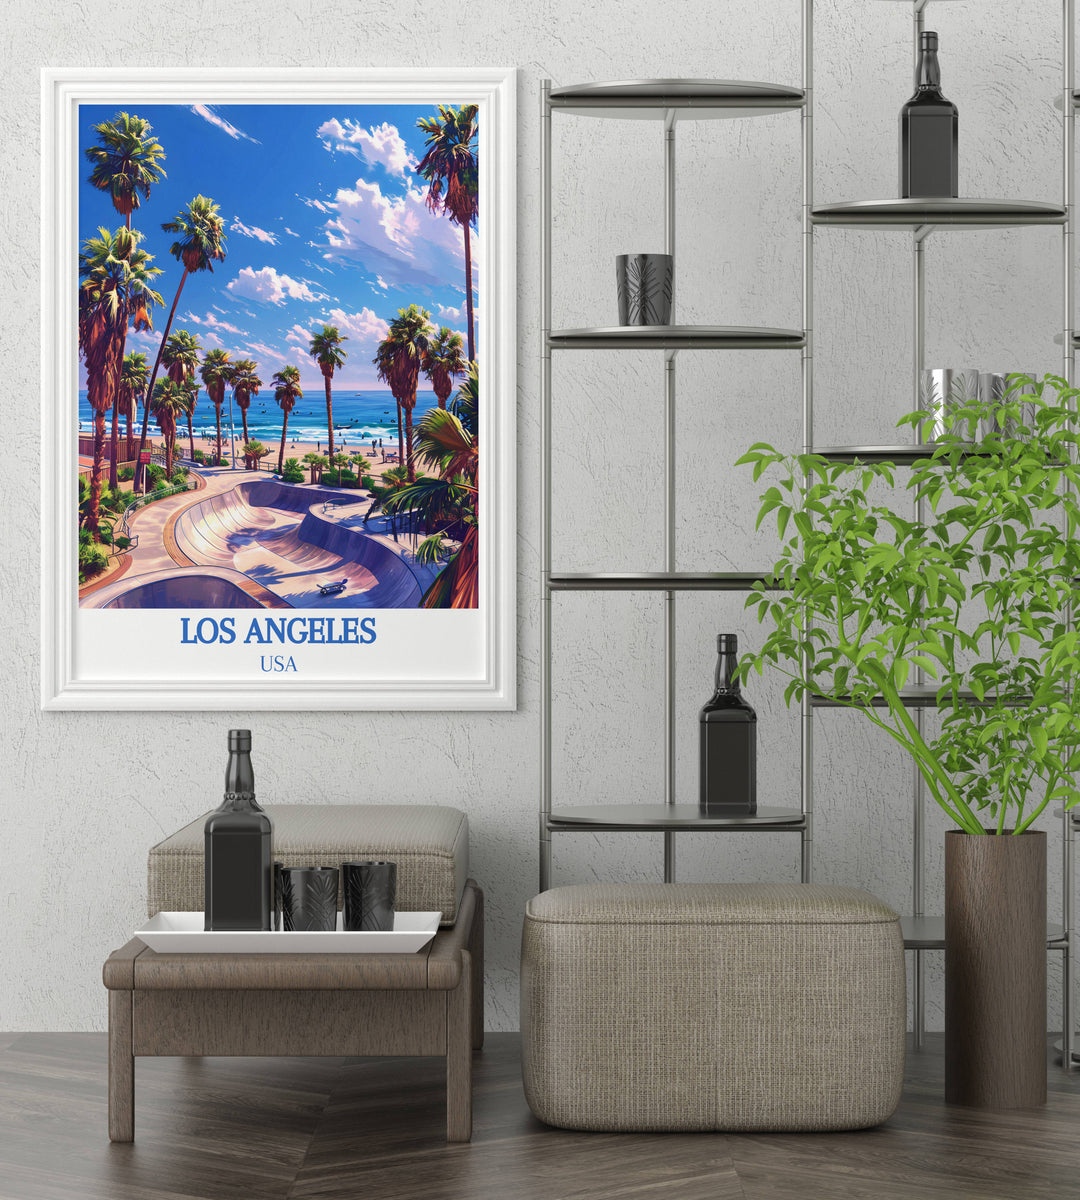 Vibrant portrayal of Venice Beach Boardwalk with its lively crowds and palm lined vistas.